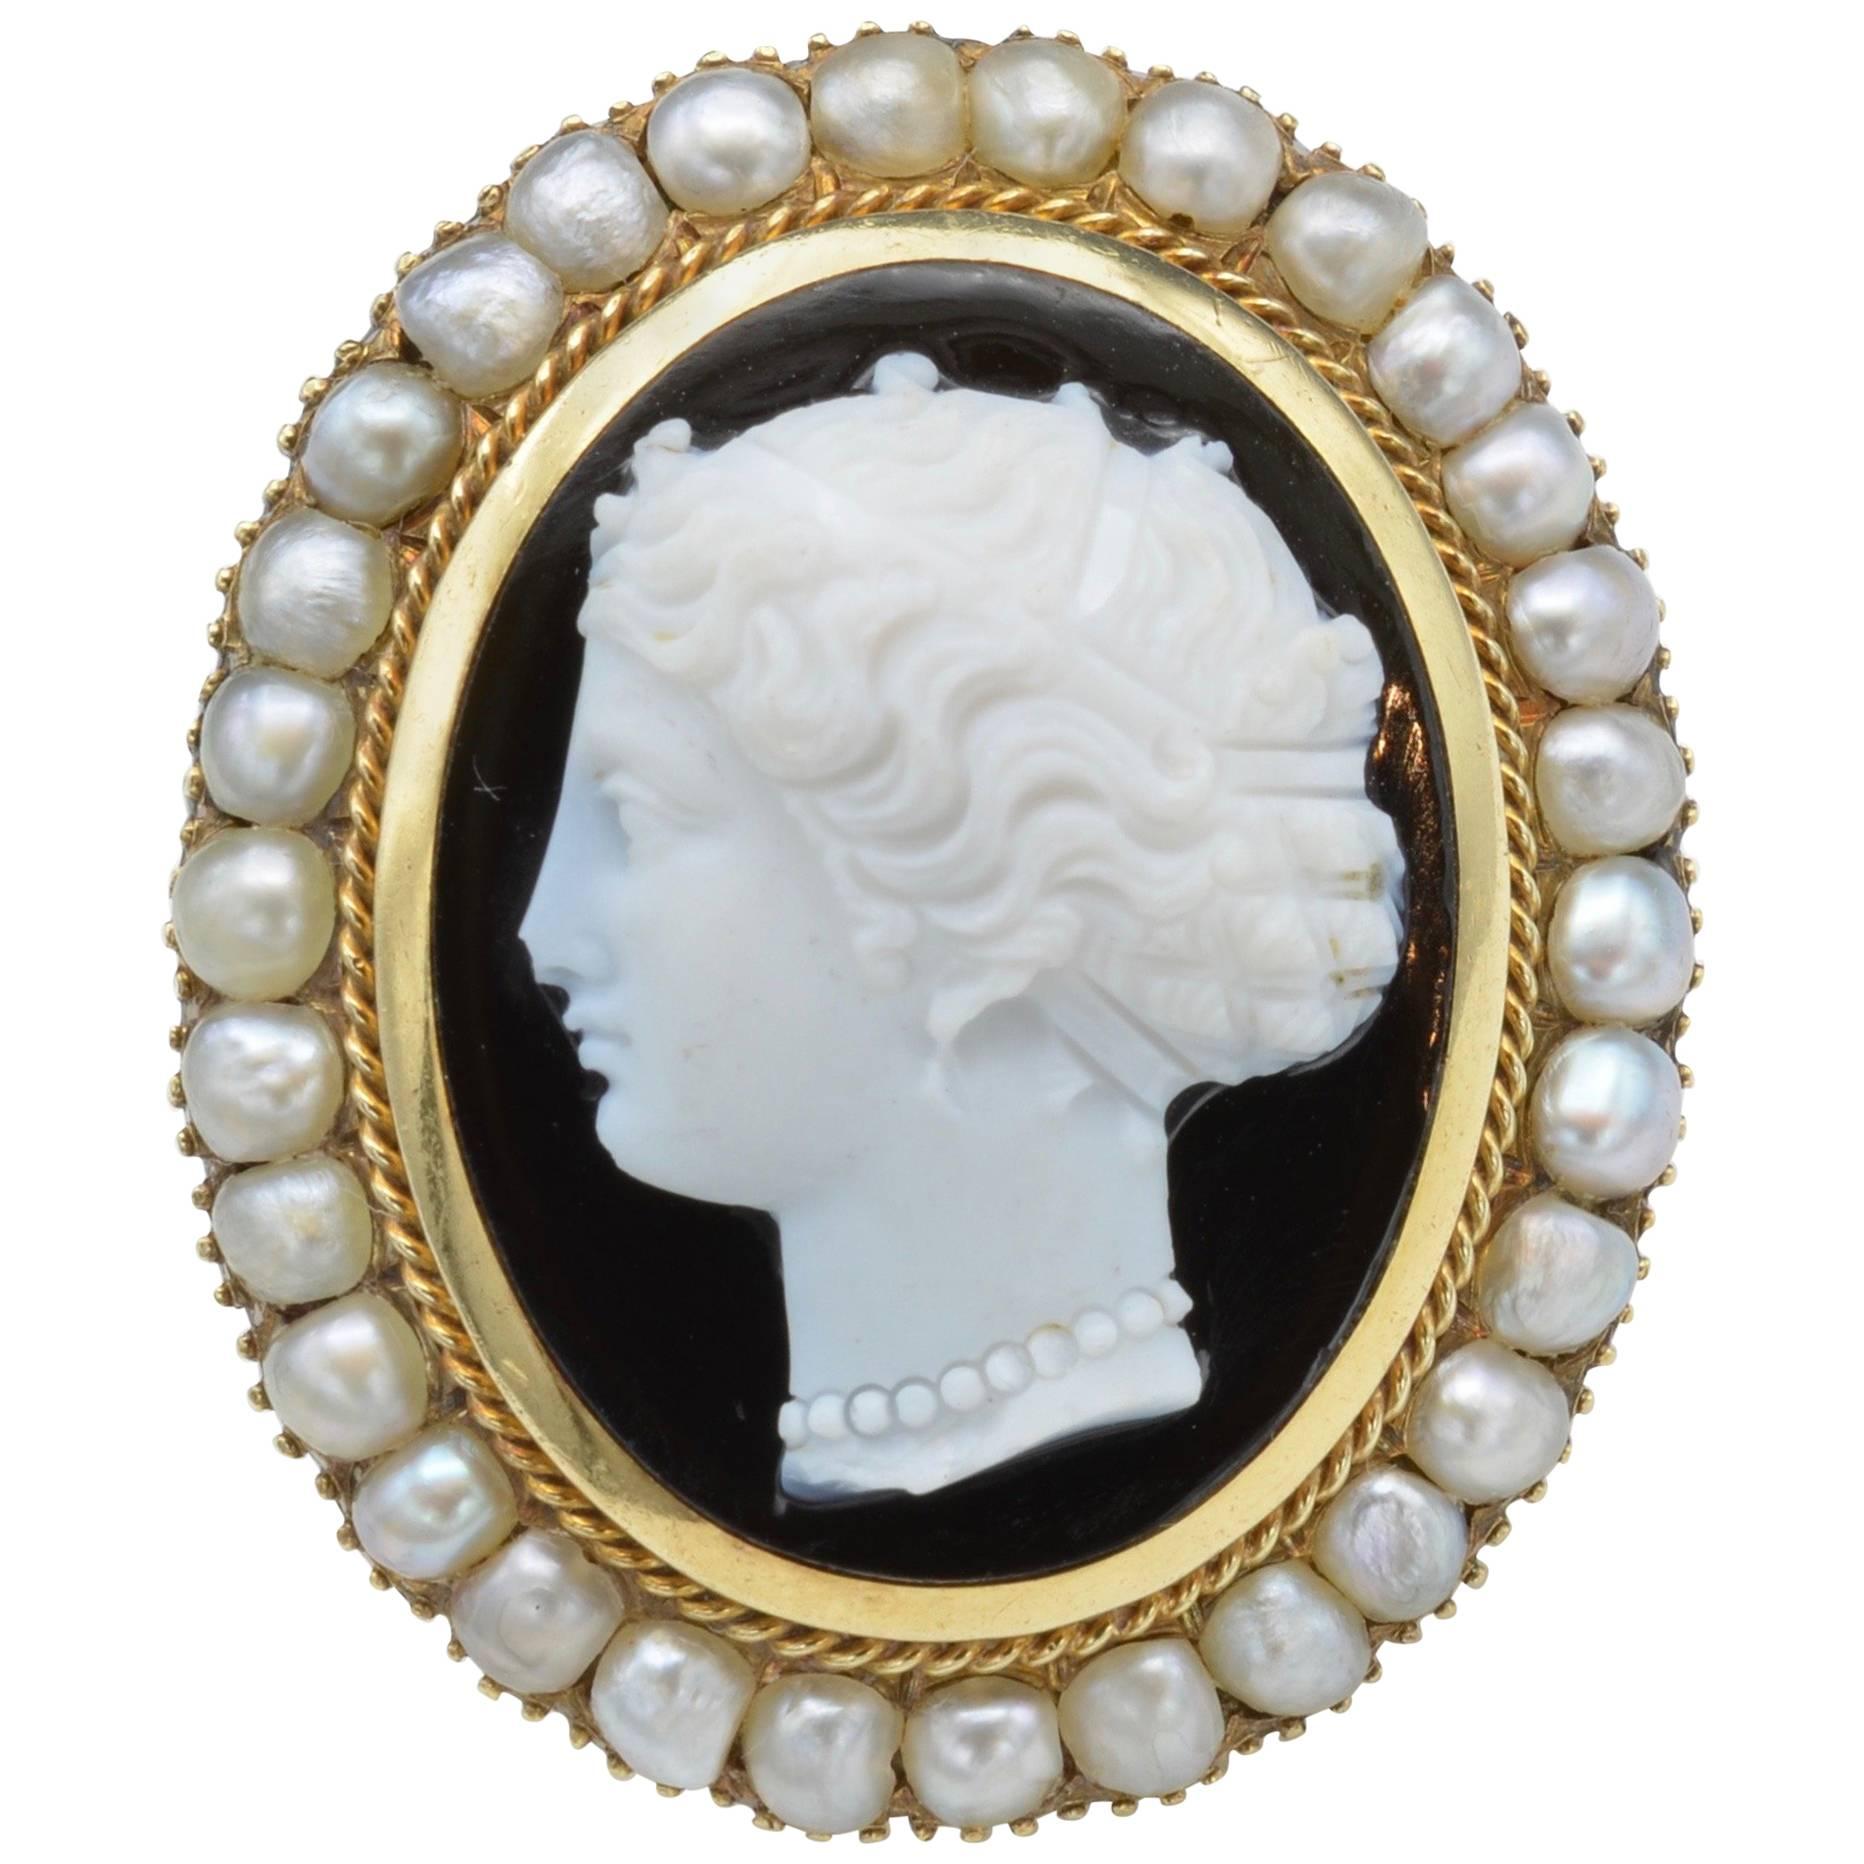 Hand-Carved Onyx Cameo Brooch with Pearl Halo from Napoleon III in Yellow Gold